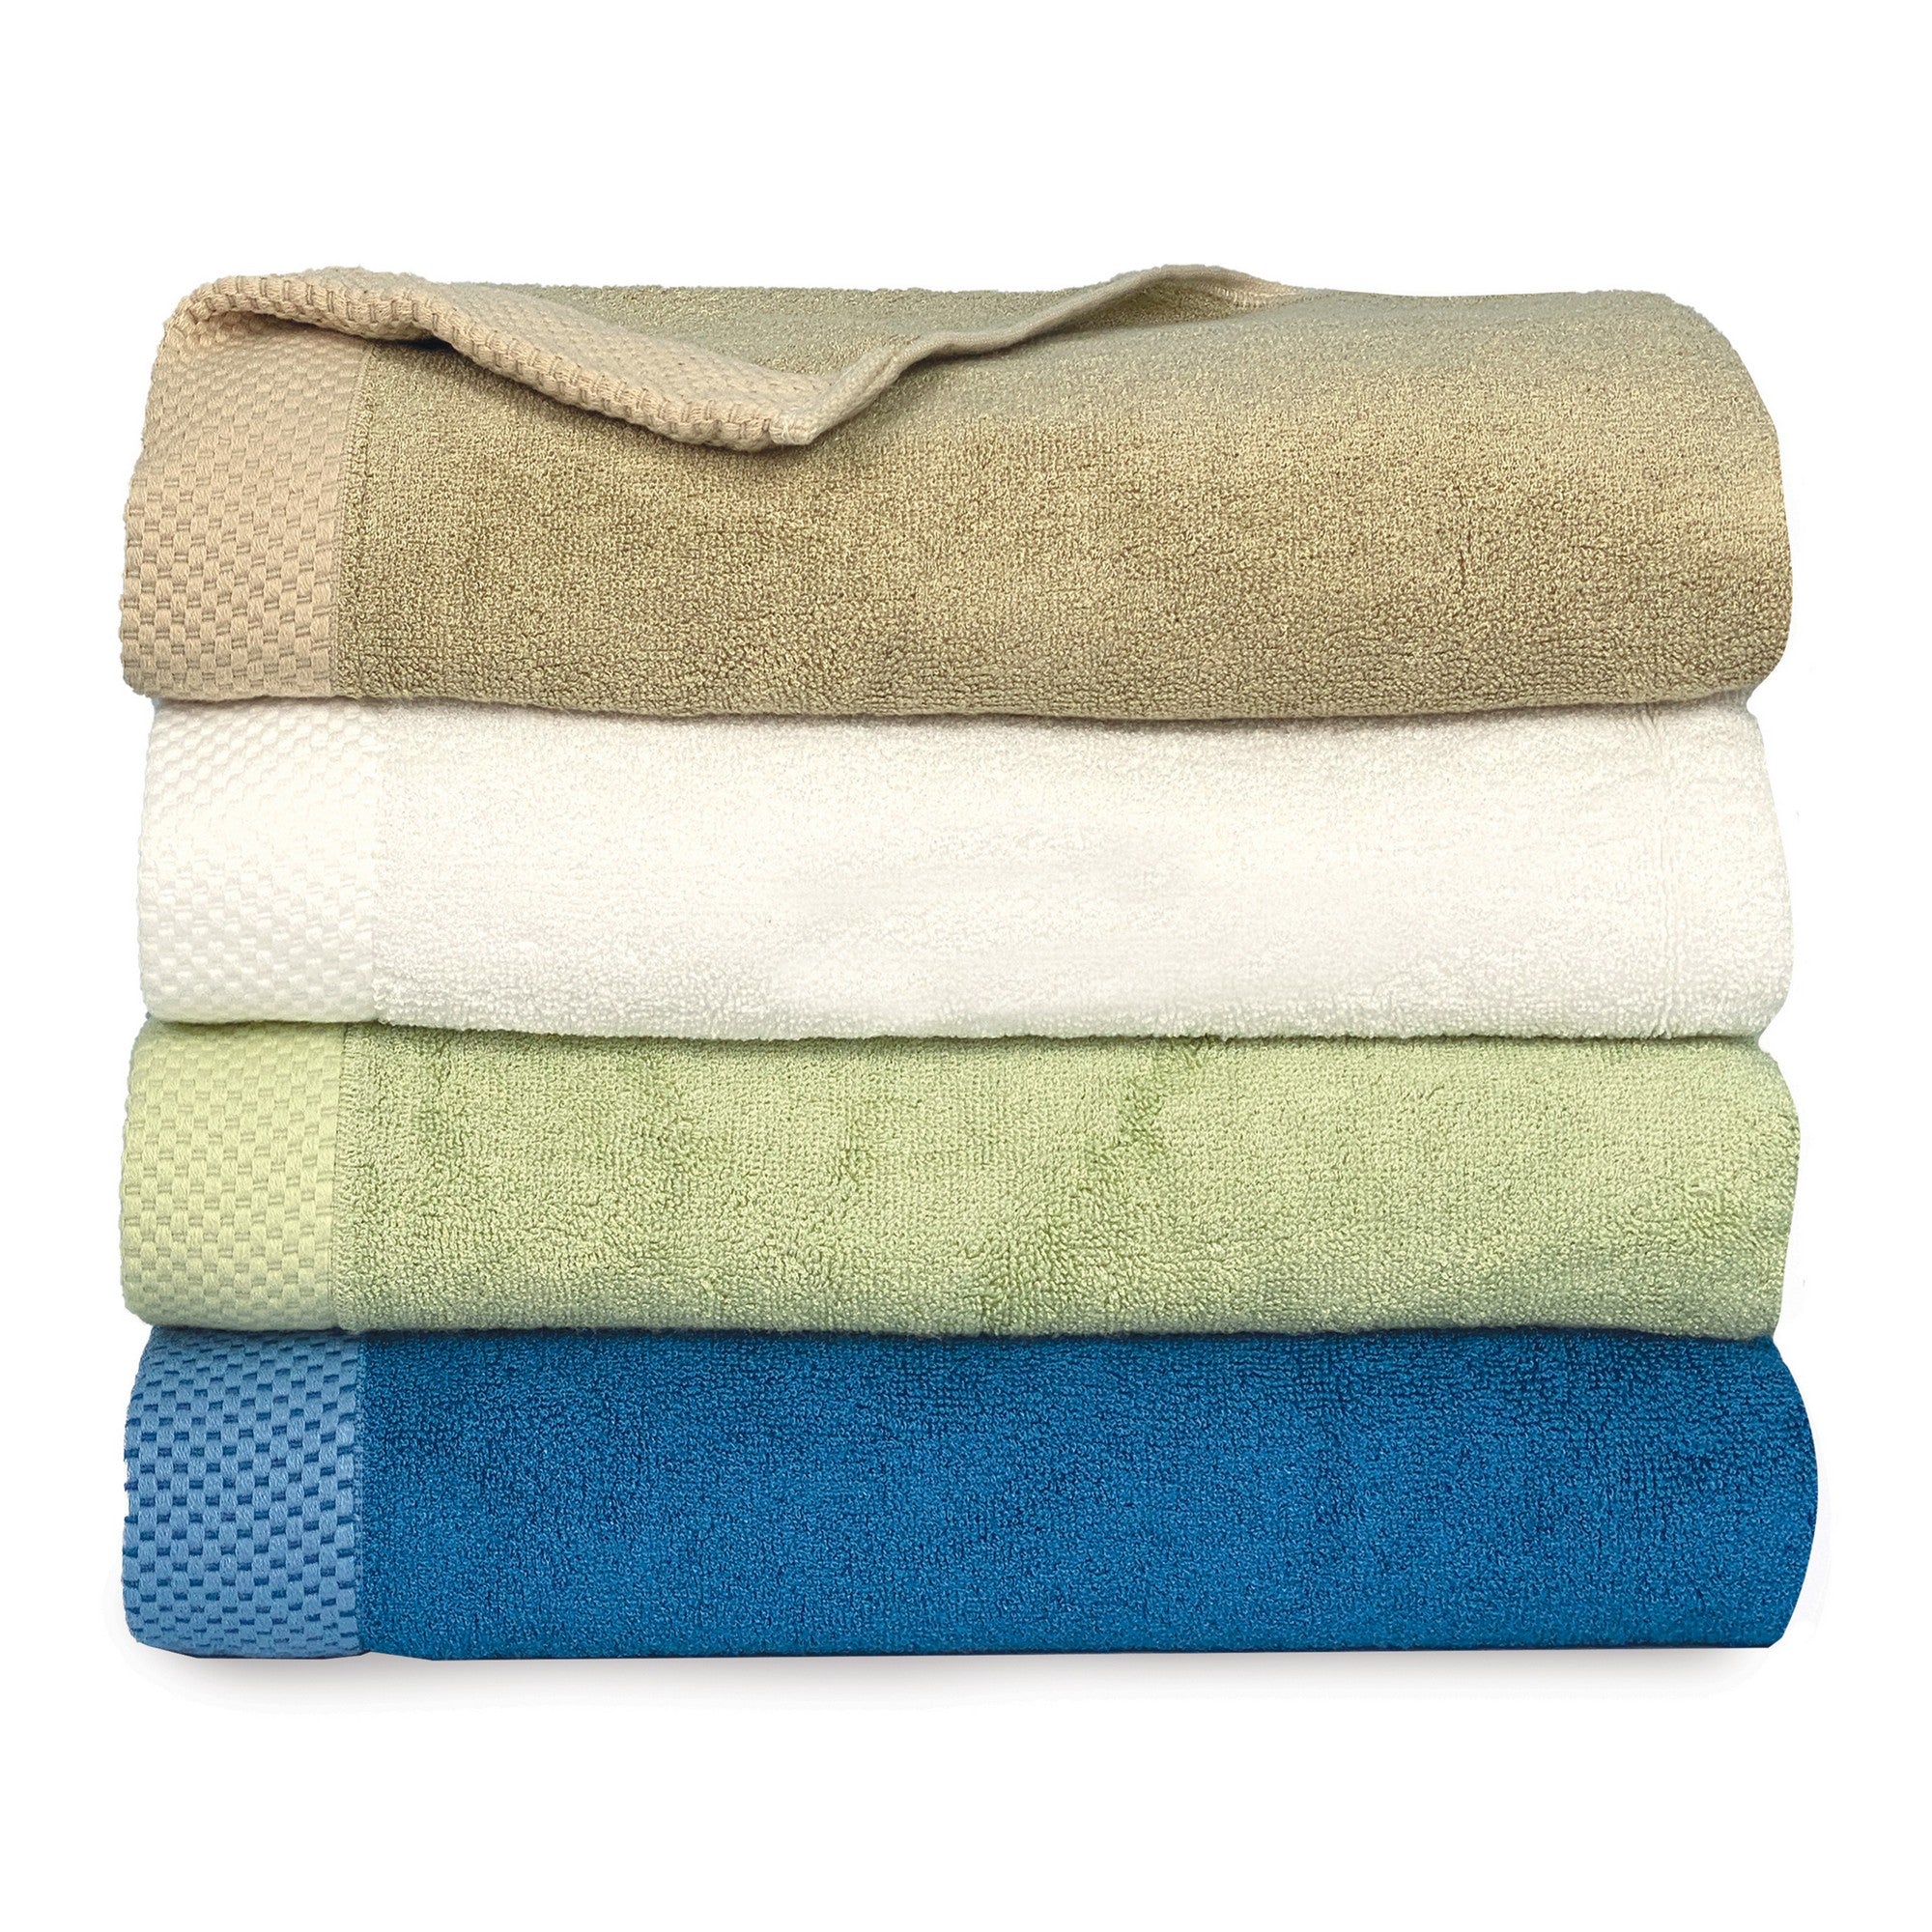 Luxury BAMBOO Bath Towel - Spa-Quality Softness, Resistant to Bacteria, Odor and Mildew- Ordinary Cotton Towels - Indigo